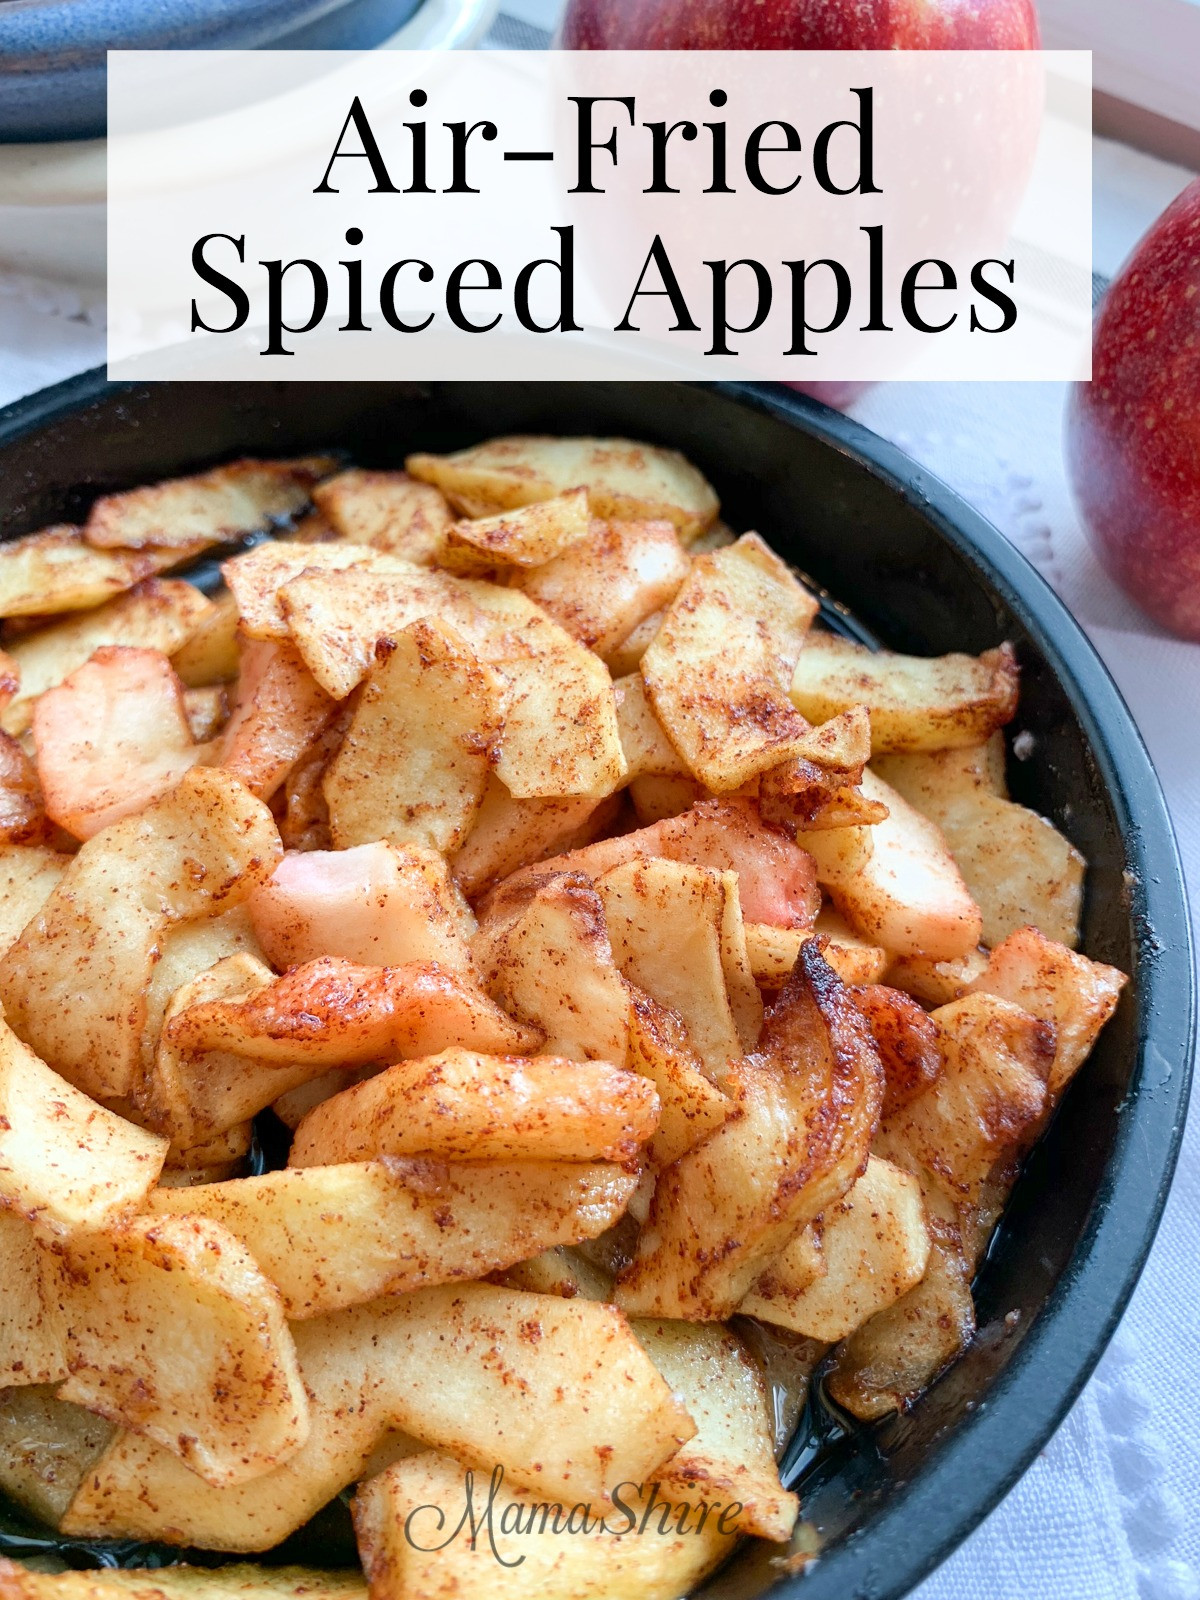 Air Fryer Apple Recipes
 Air Fried Spiced Apples Gluten free MamaShire